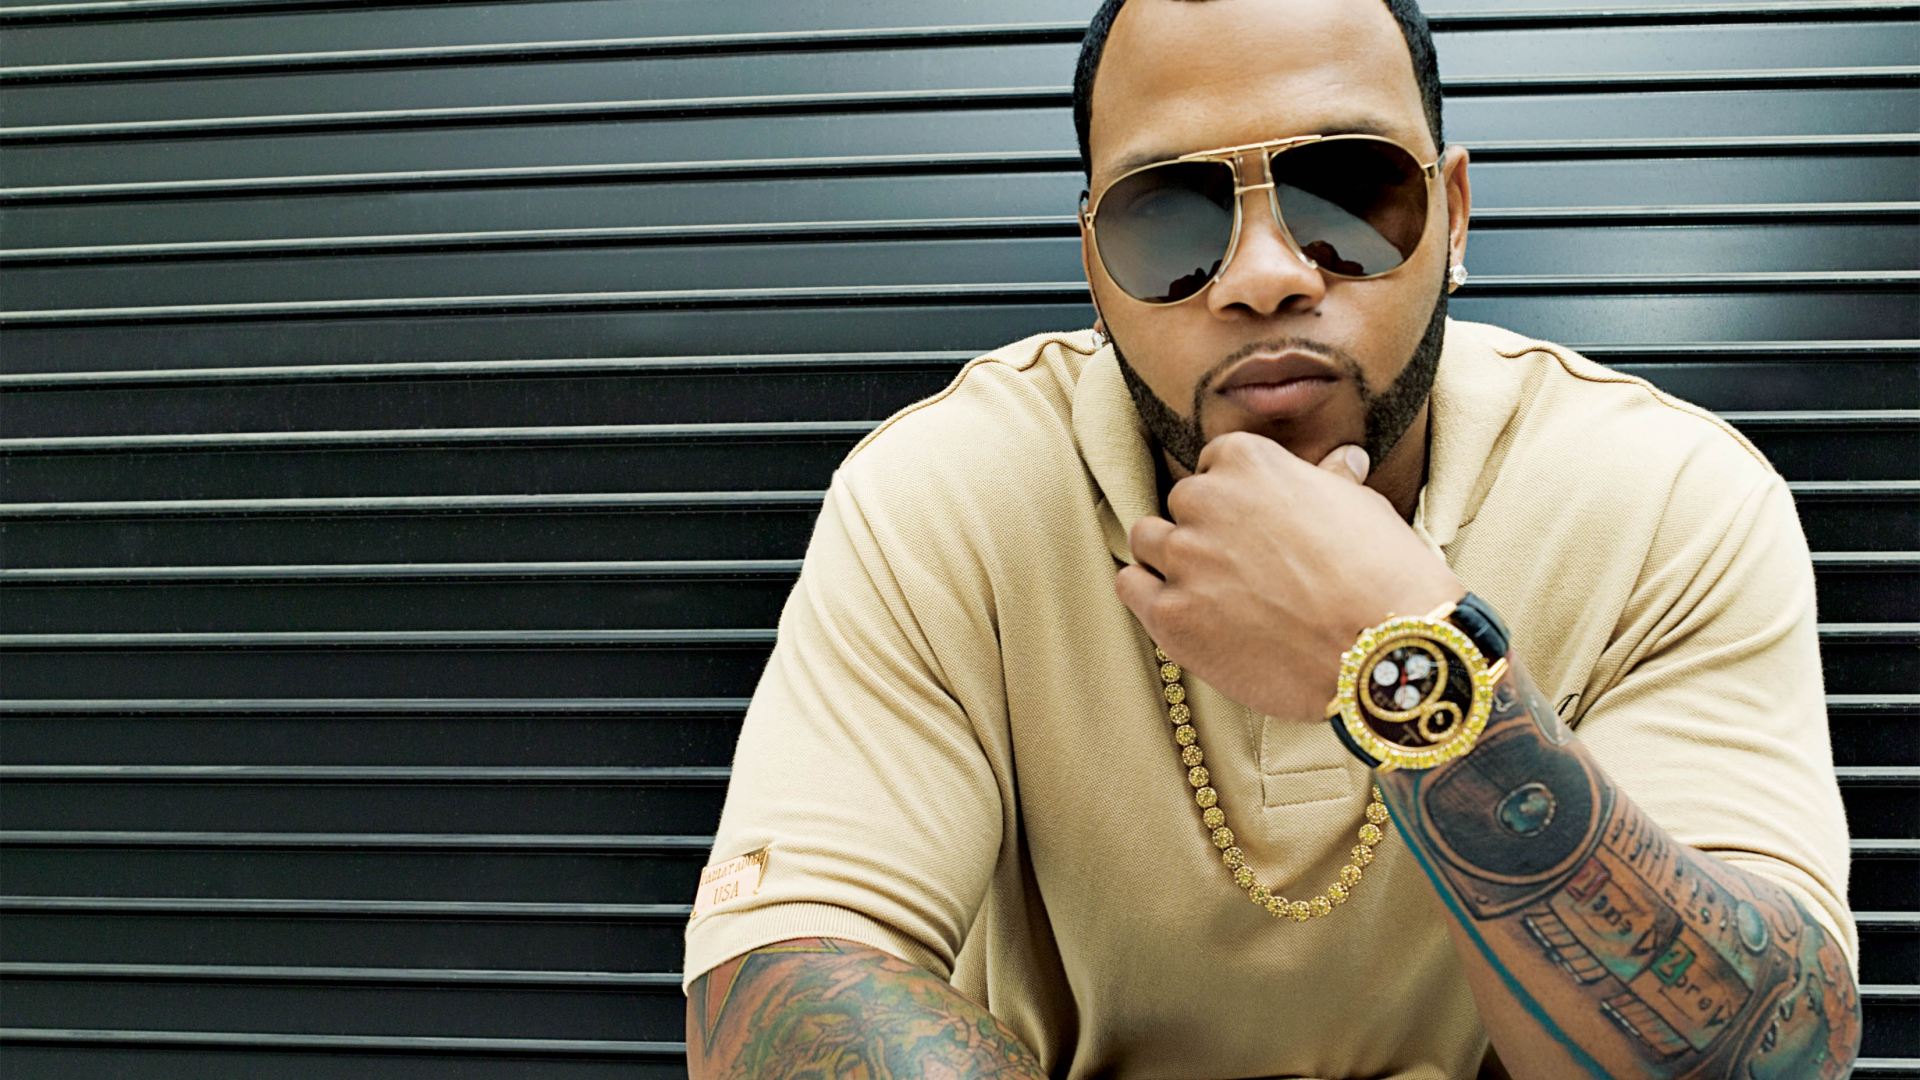 5 Flo Rida HD Wallpapers Backgrounds - Wallpaper Abyss